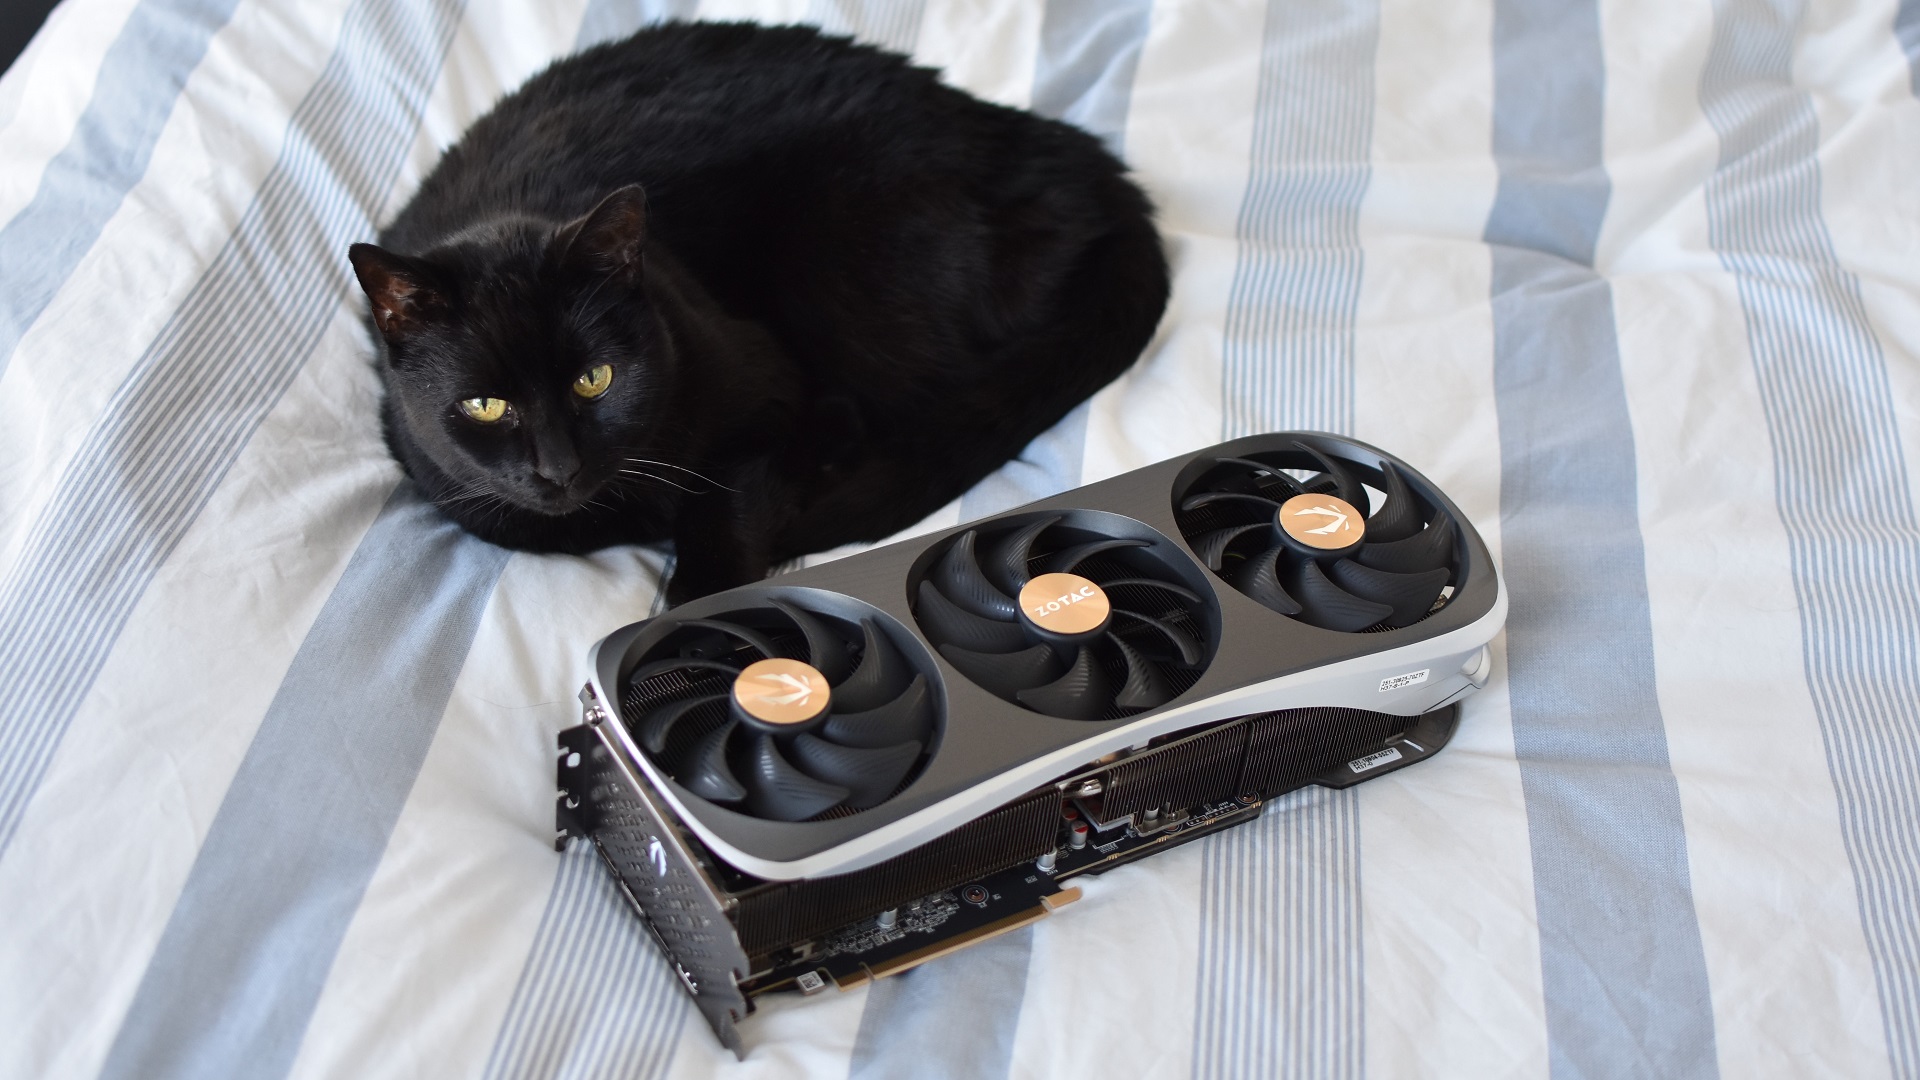 The Zotac Gaming GeForce RTX 4090 Amp Extreme Airo graphics card lying next to Roxy, a perfect black cat.